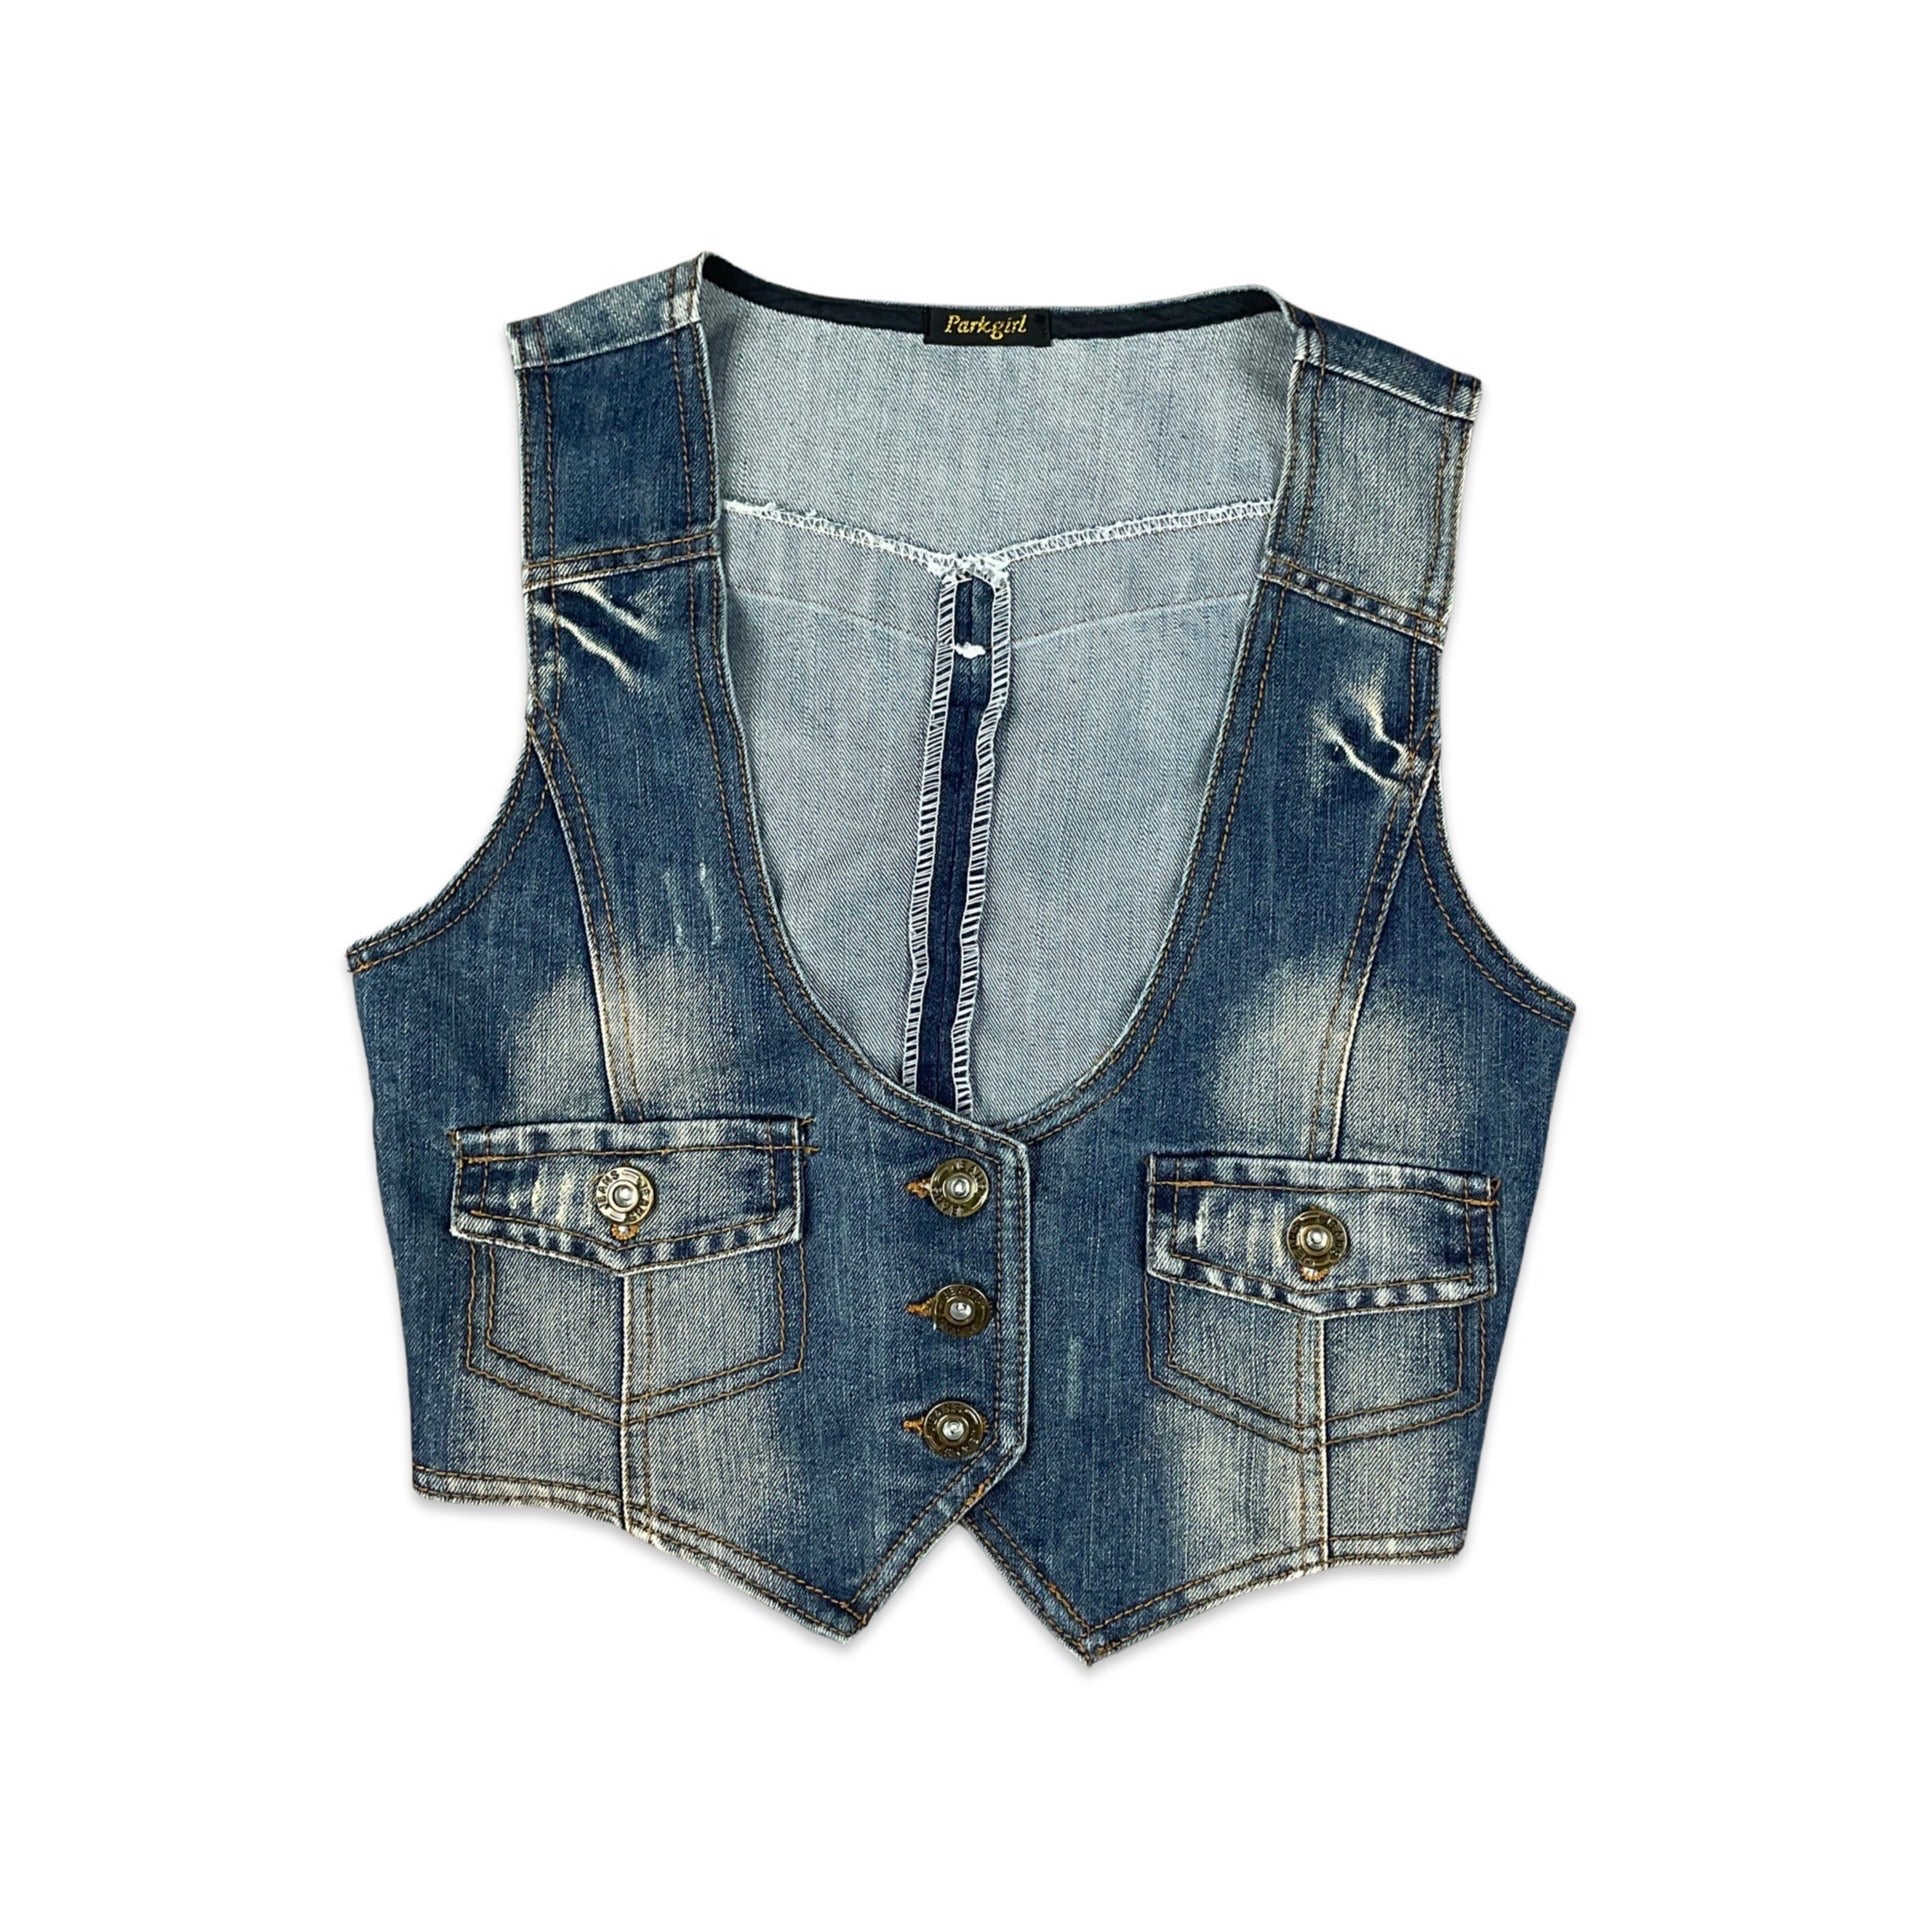 The best women's waistcoats for sharpening up your 9 to 5